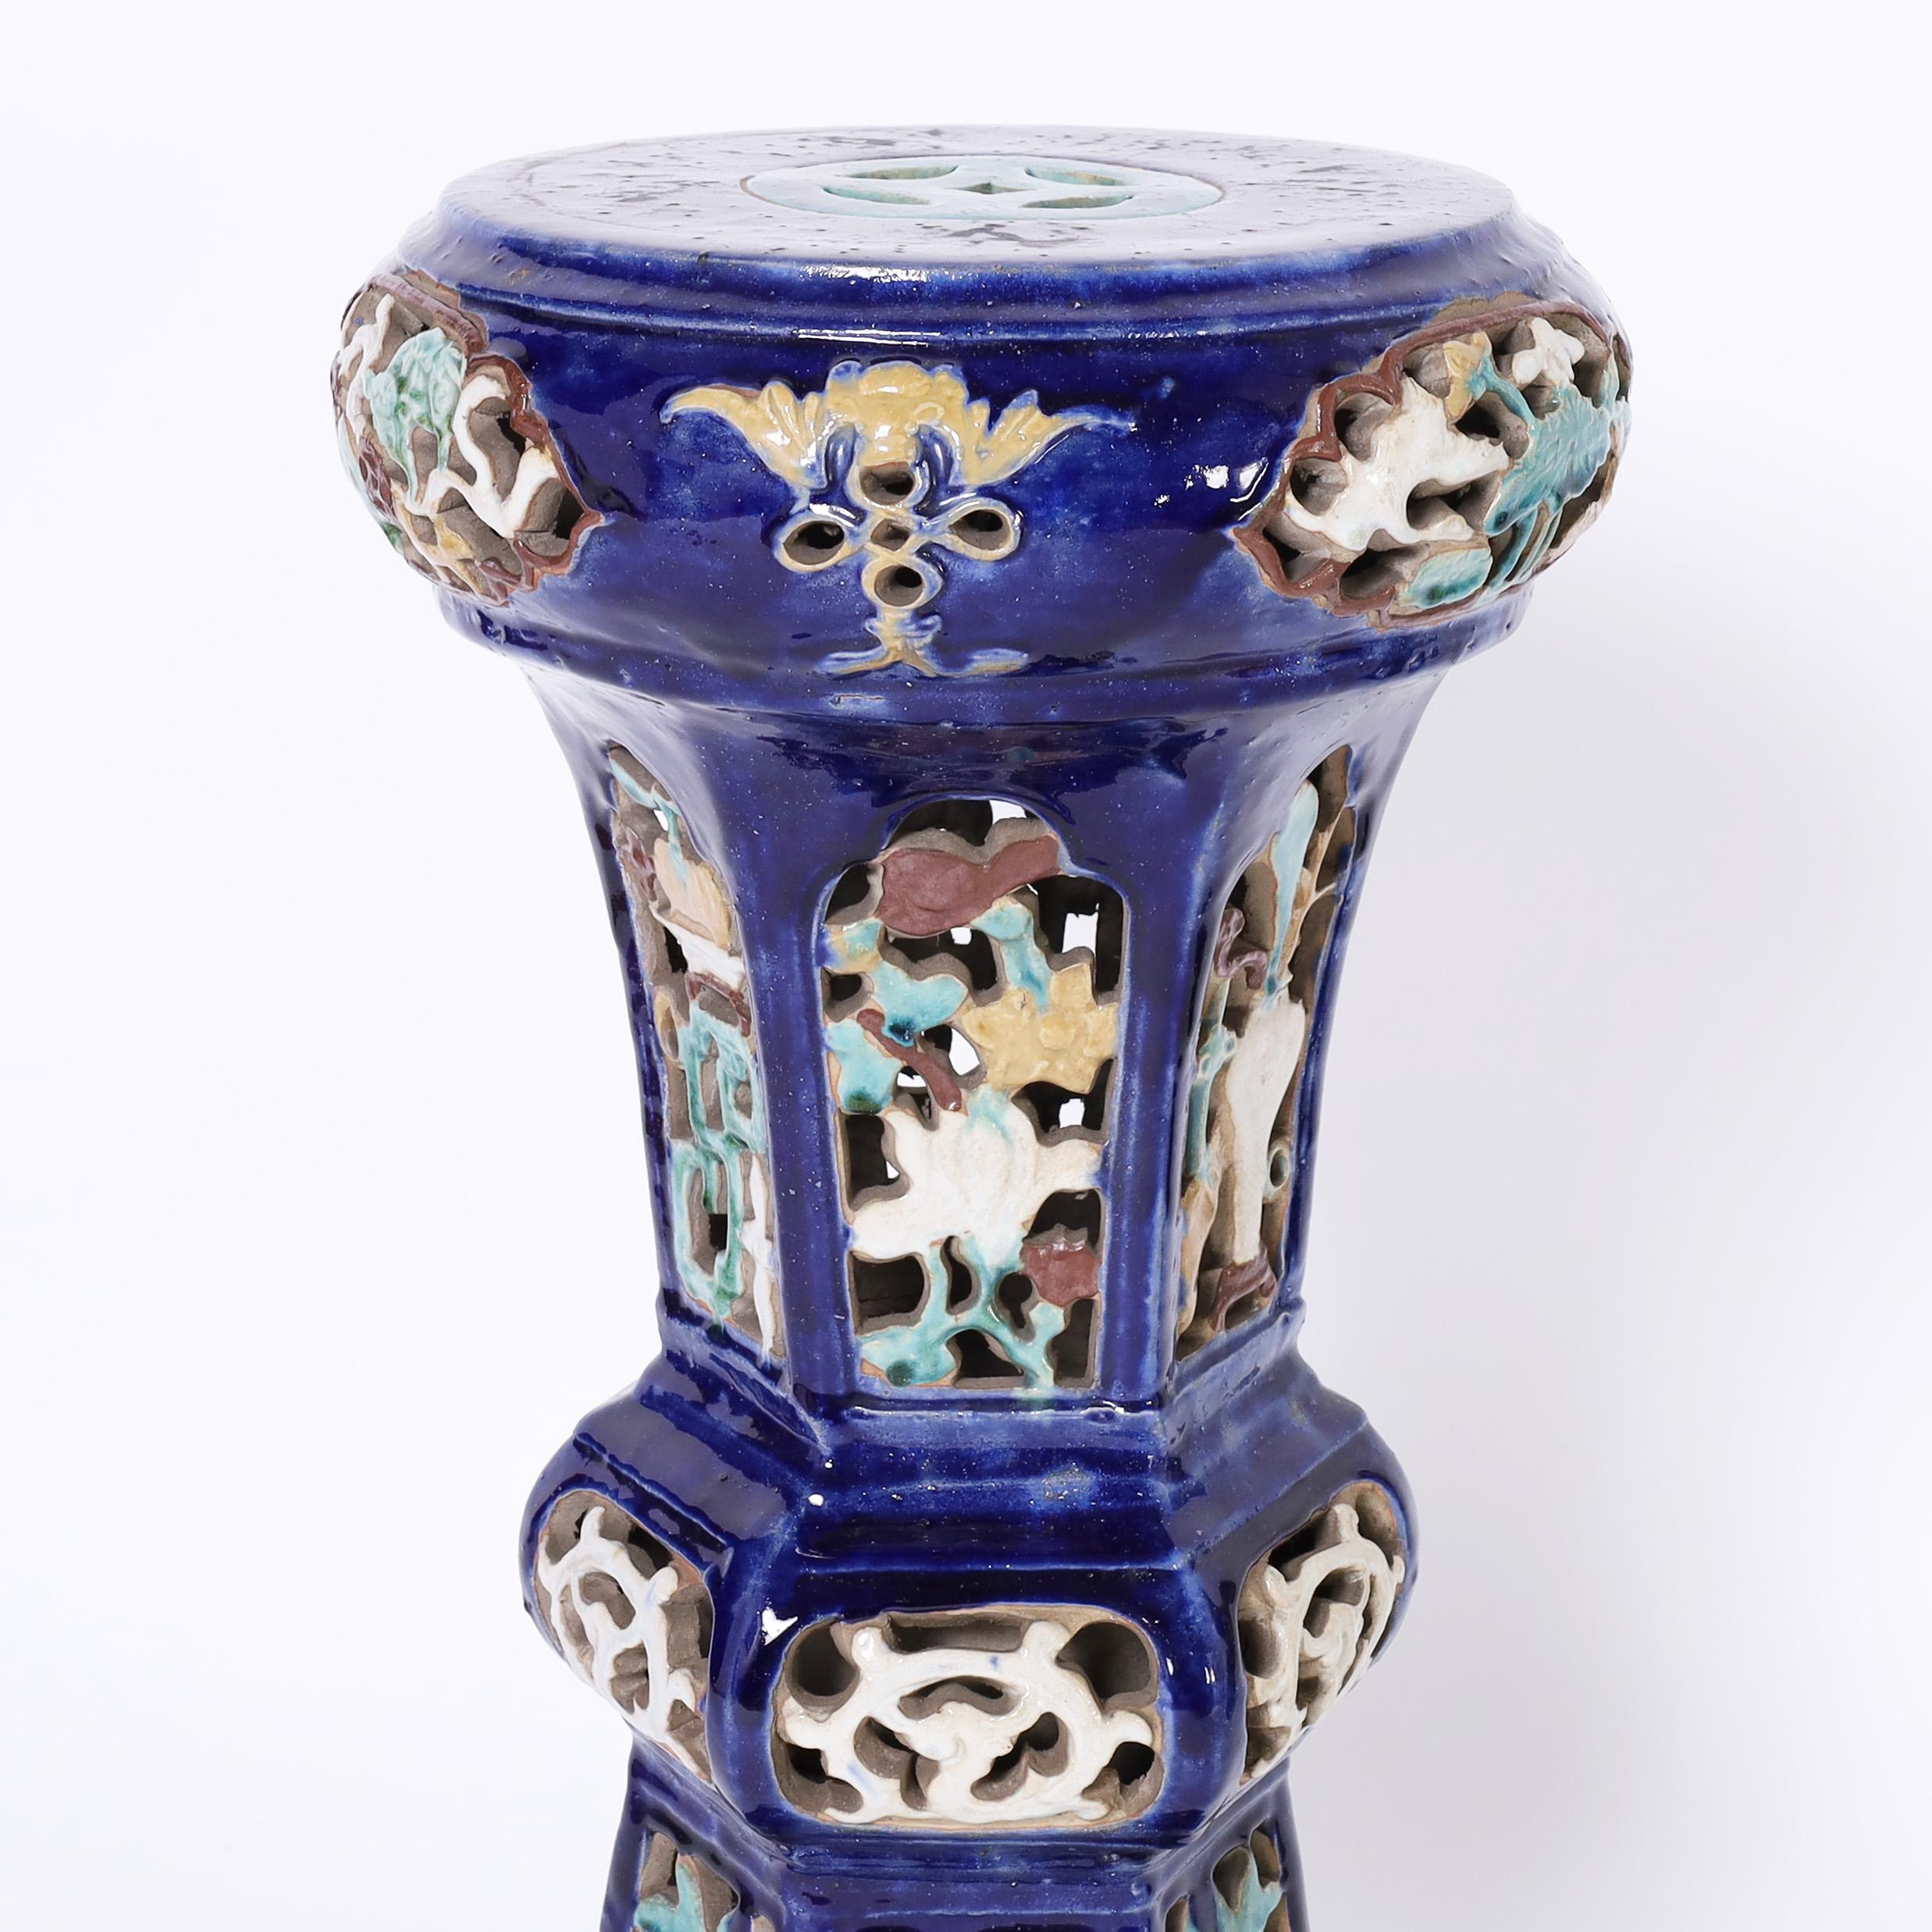 Near Pair of Chinese Glazed Terra Cotta Pedestals In Good Condition For Sale In Palm Beach, FL